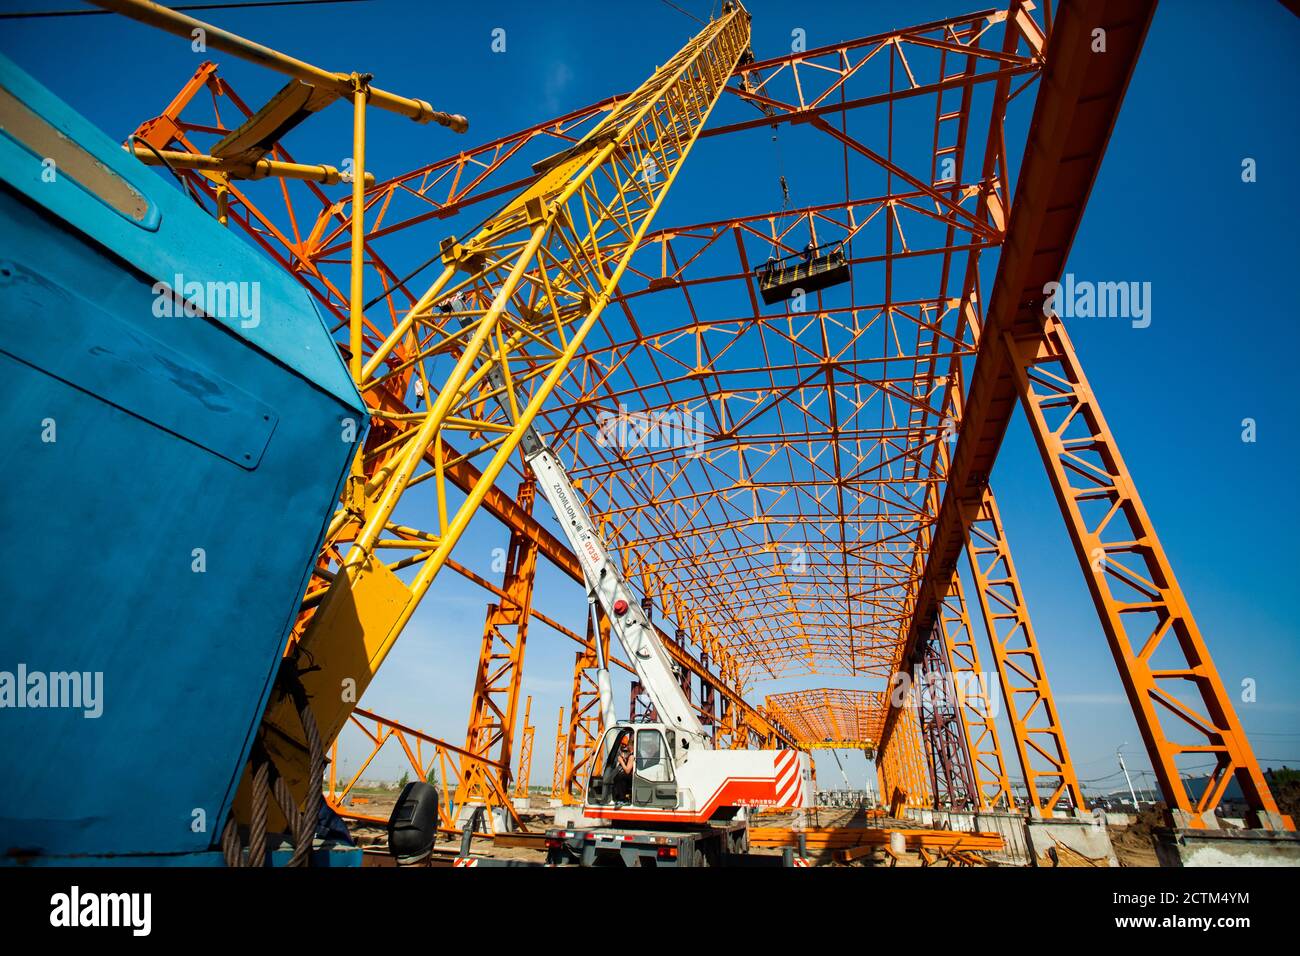 Kostanay/Kazakhstan - May 14 2012: Construction of new factory building orange steel structure. Yellow girder crane and workers in construction suspen Stock Photo